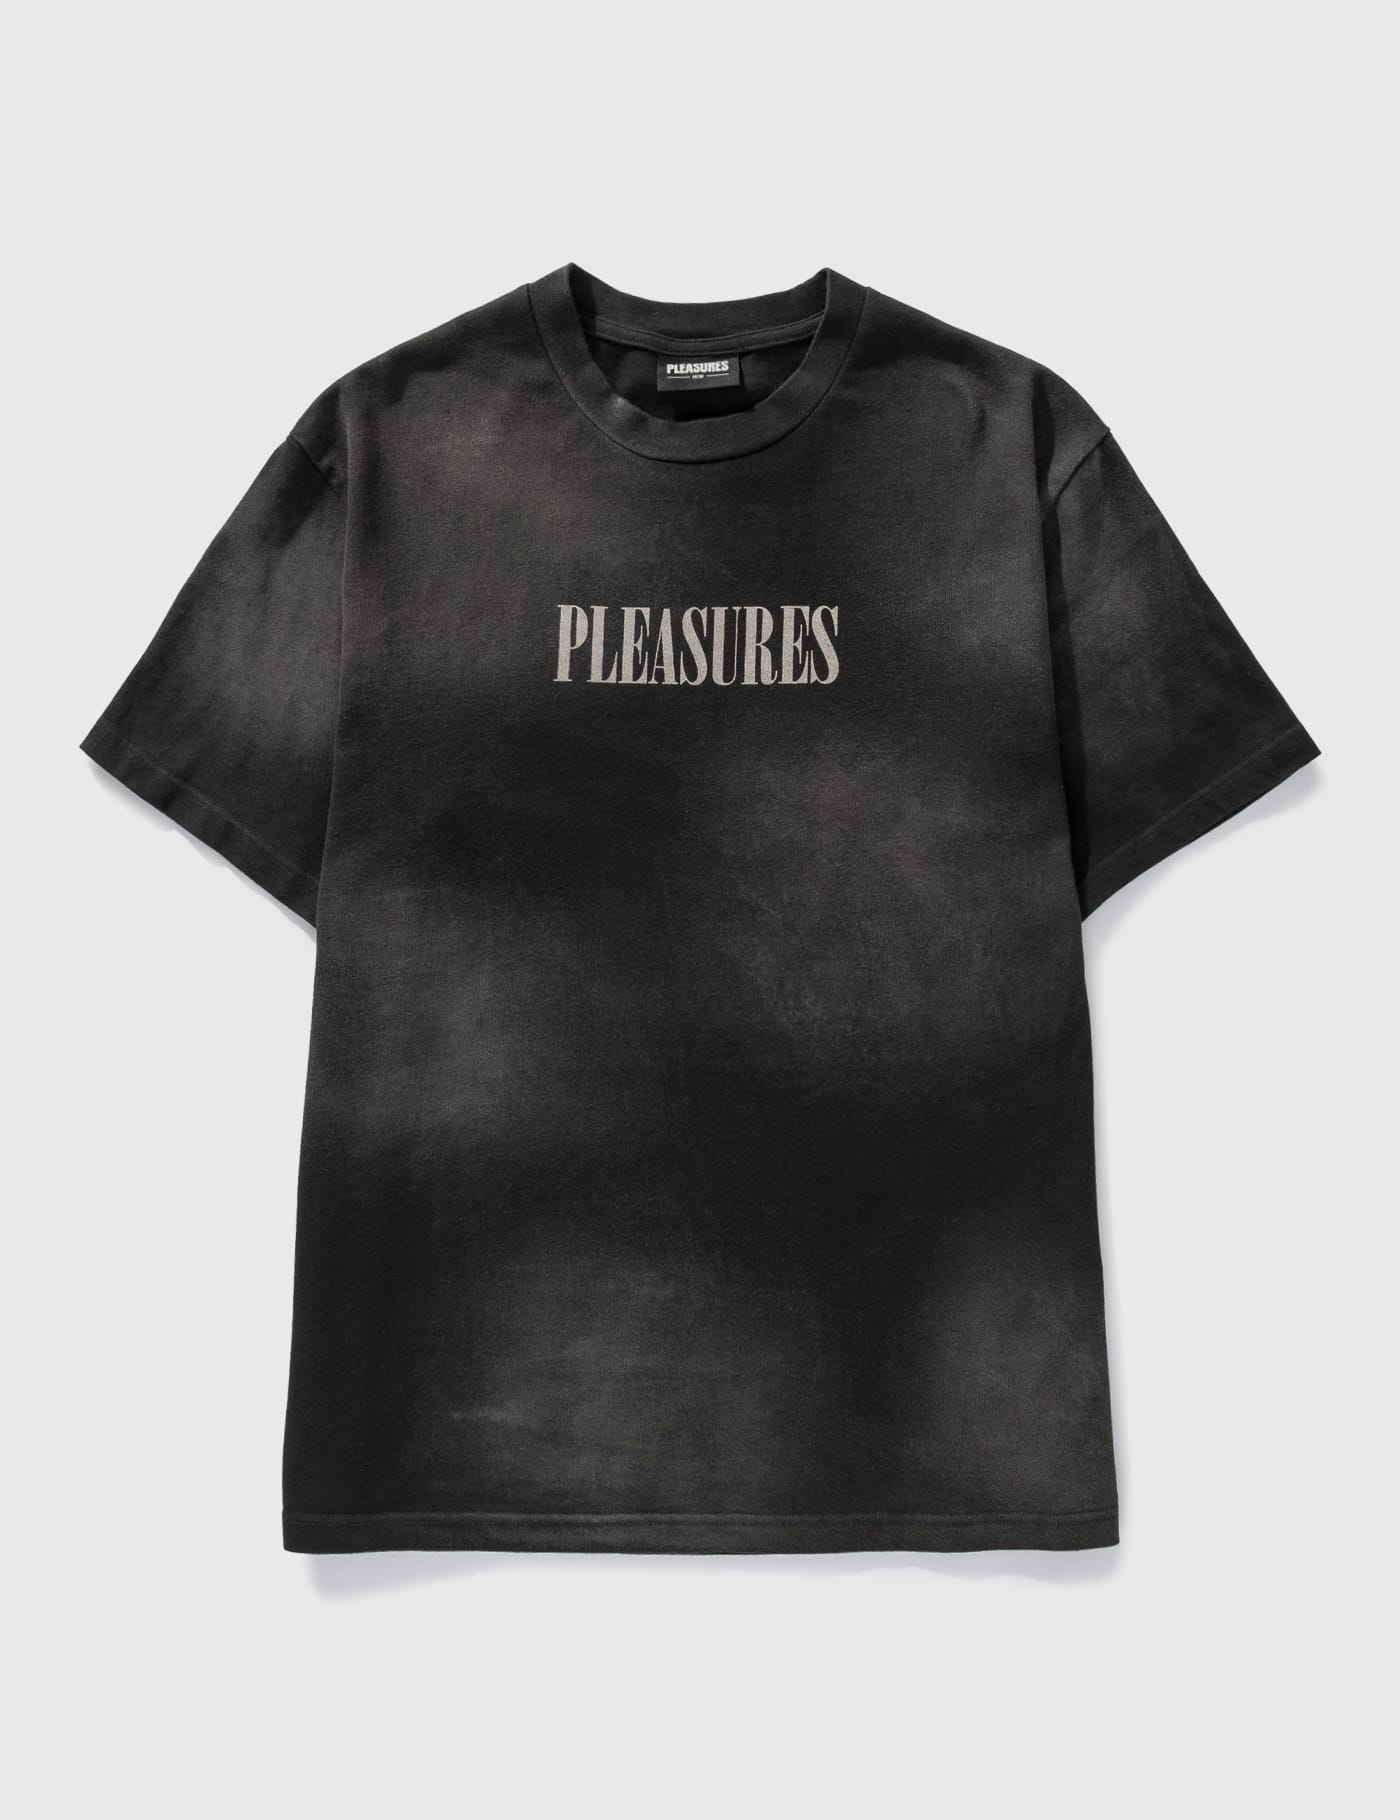 Pleasures | HBX - Globally Curated Fashion and Lifestyle by 